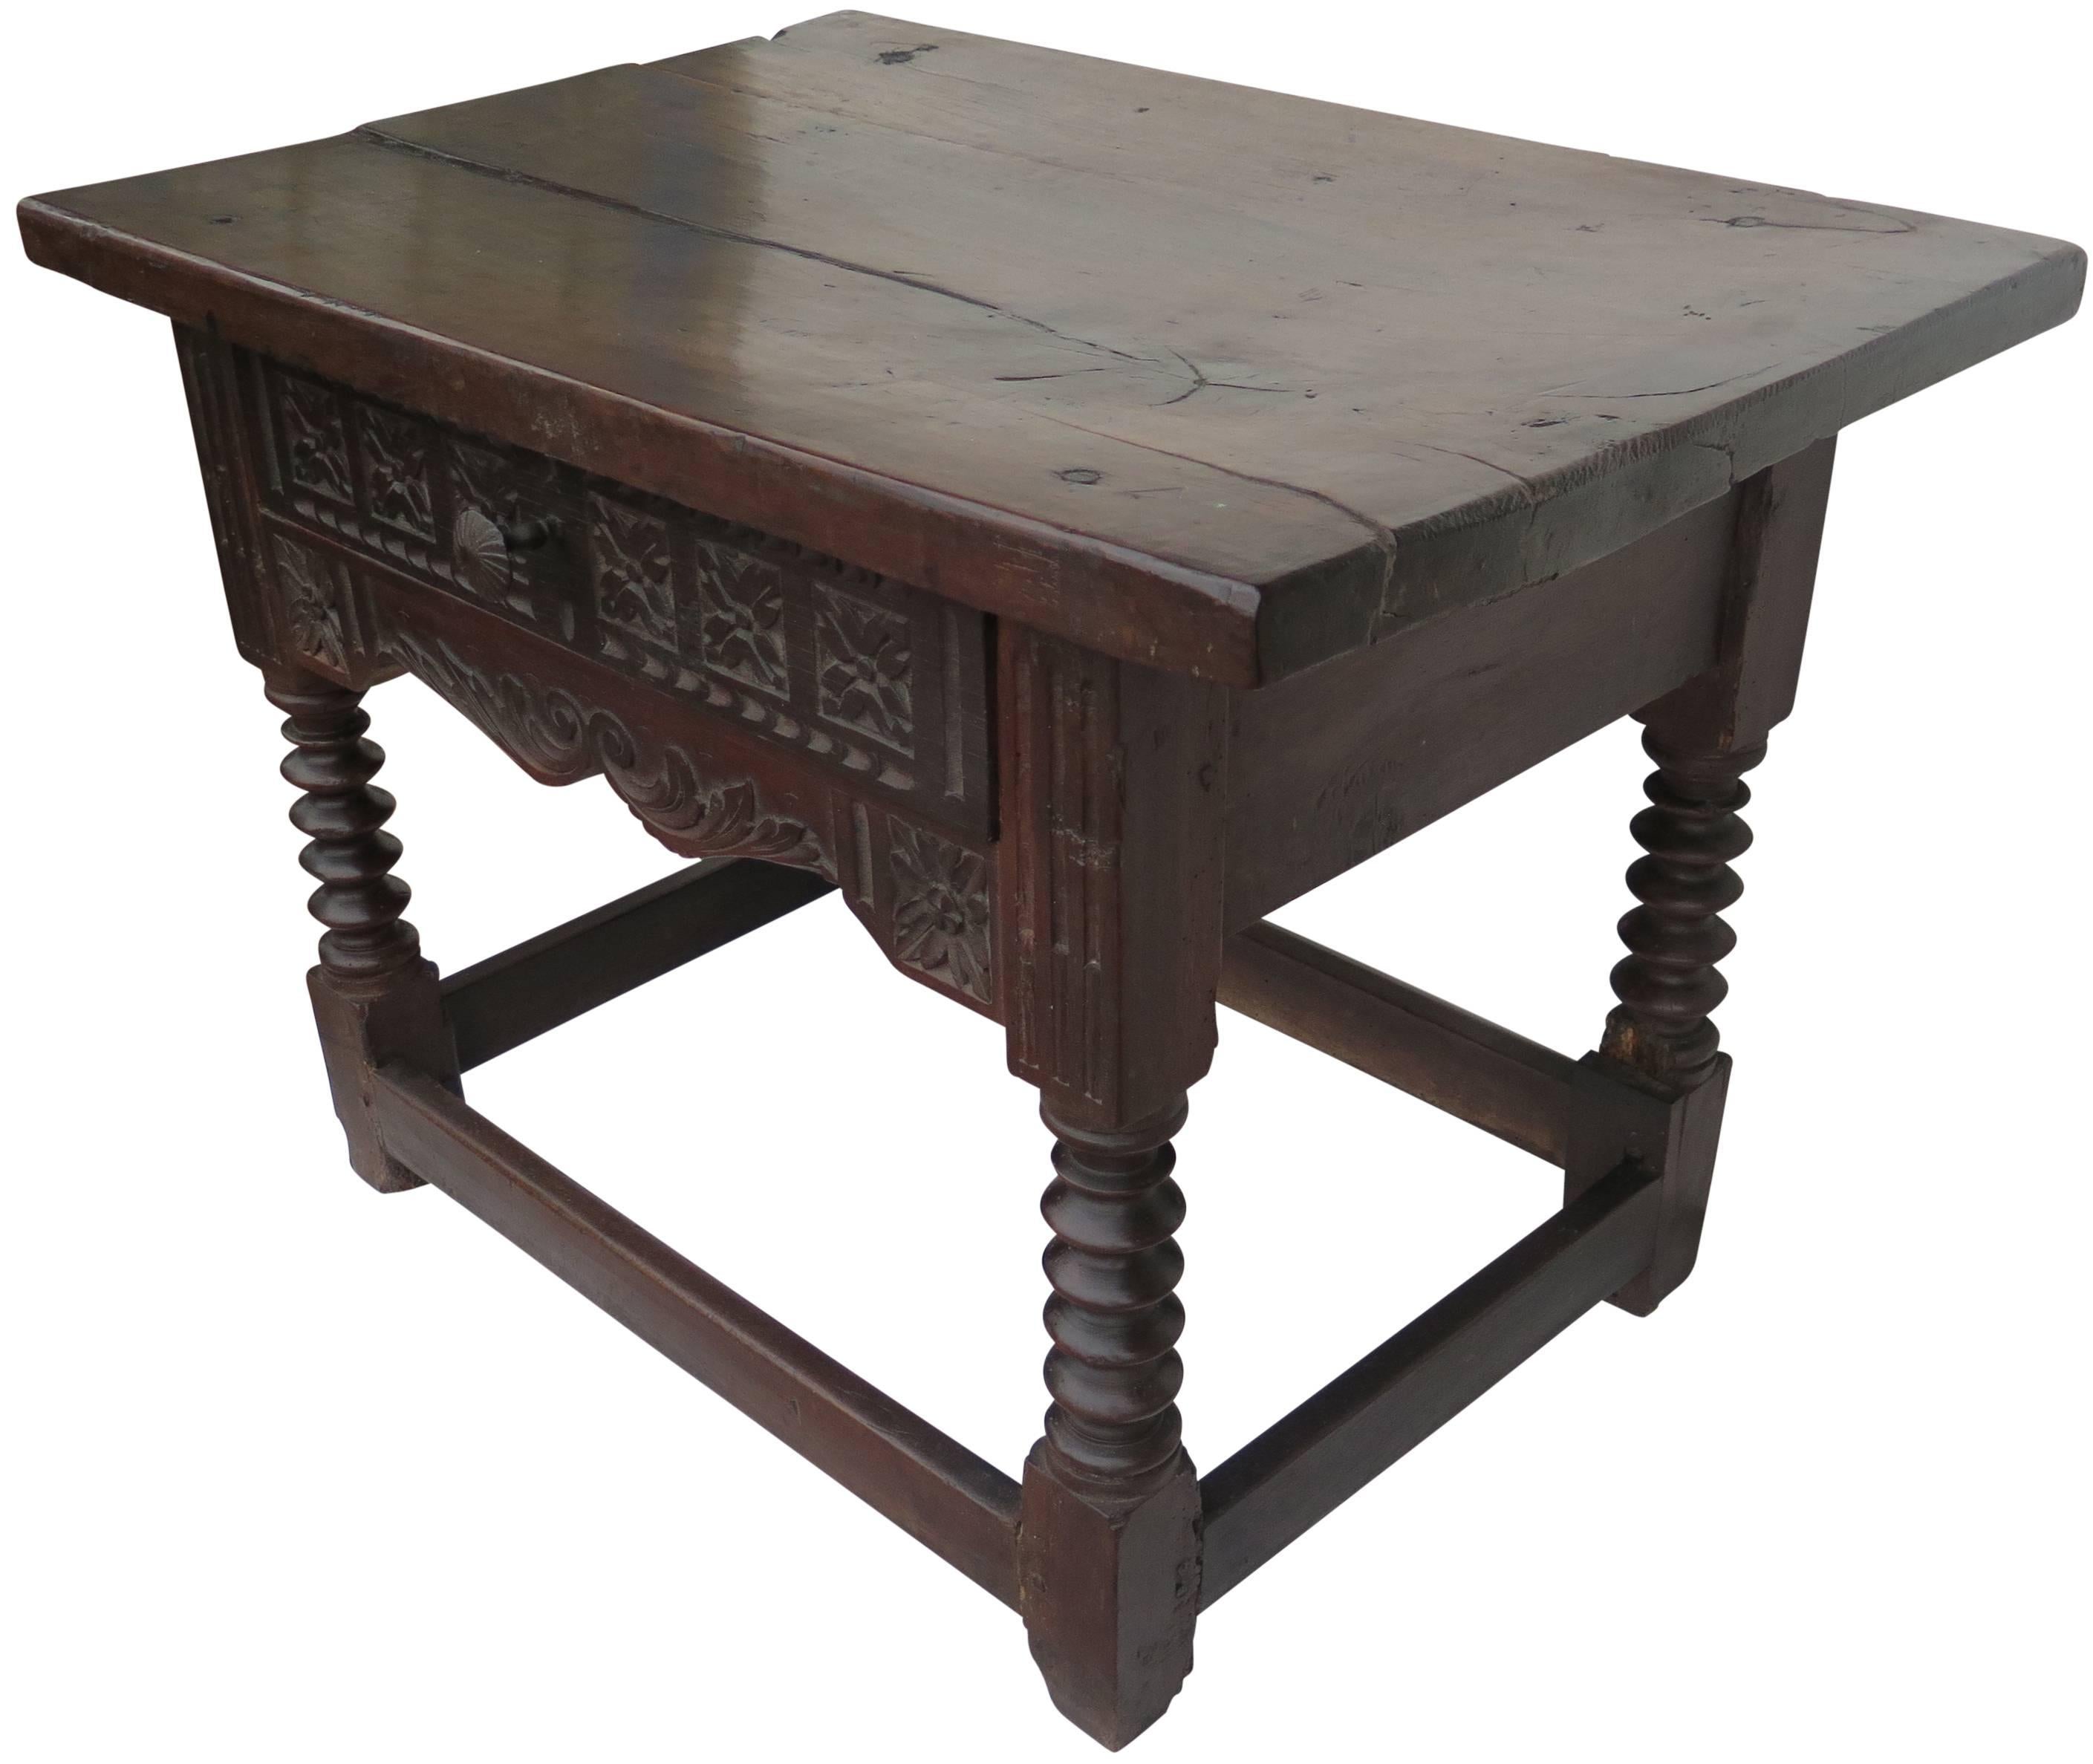 Nice 18th century Spanish side table with ice slab top. Carved drawer and turned legs.